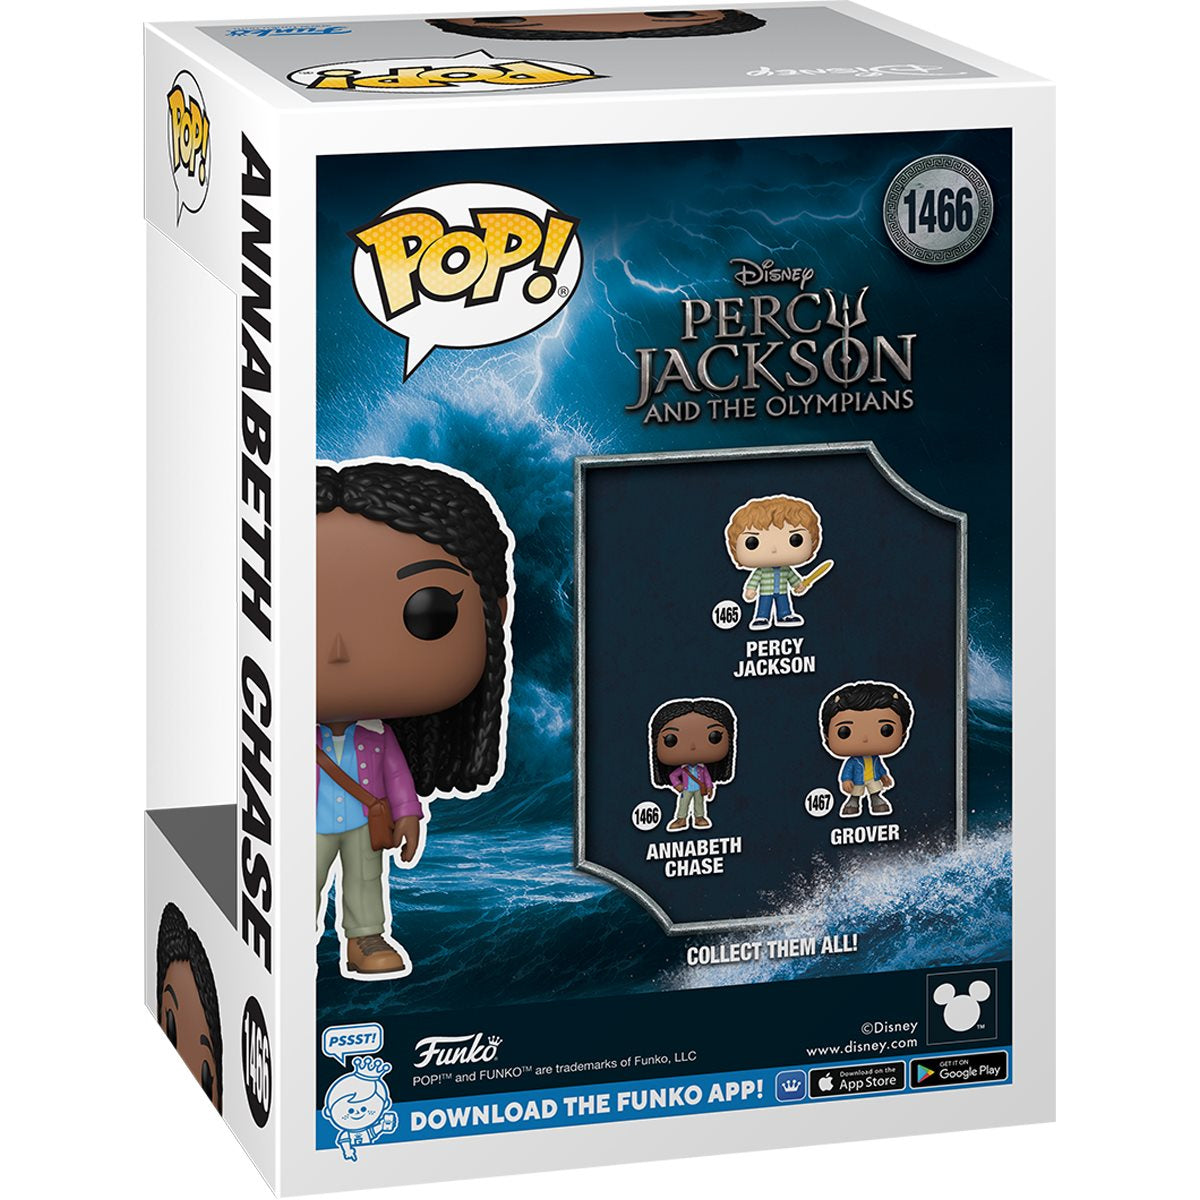 Funko Pop! Percy Jackson and The Olympians Annabeth Chase Vinyl Figure #1466